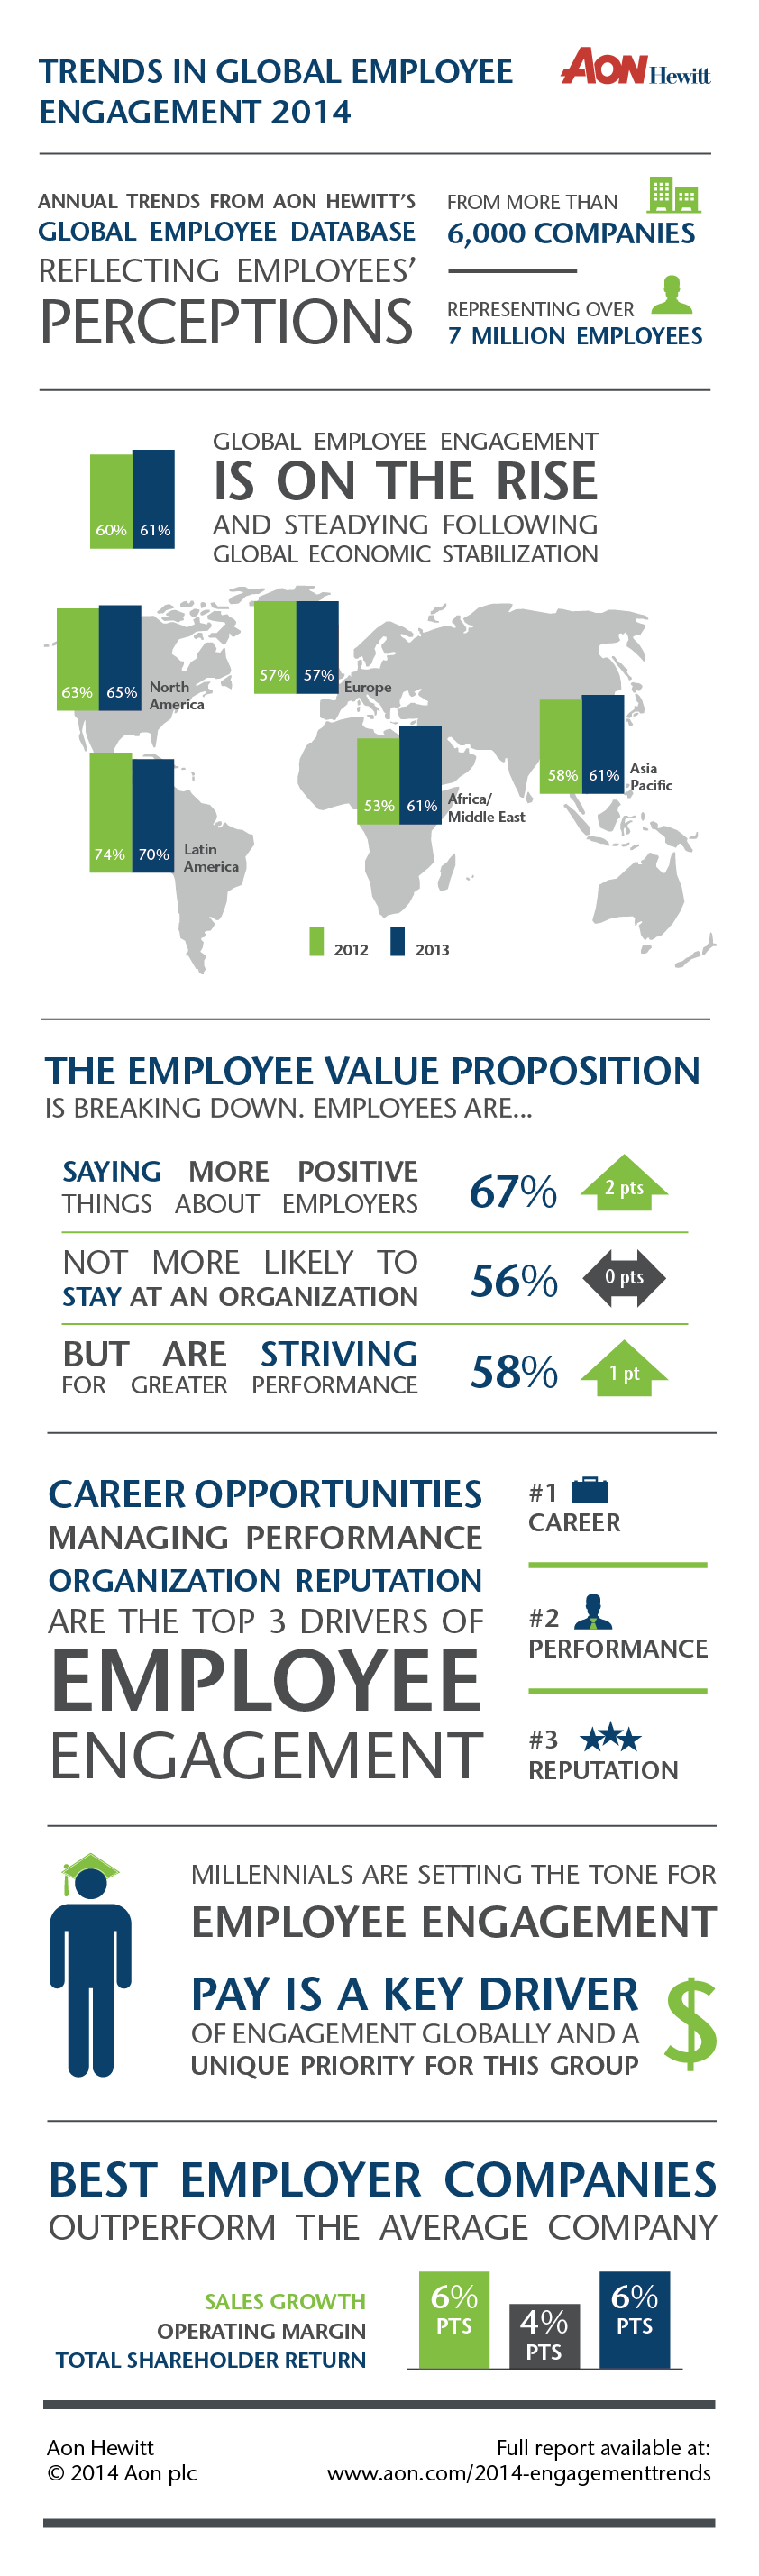 Trends in Global Employee Engagement 2014 by Aon Hewitt